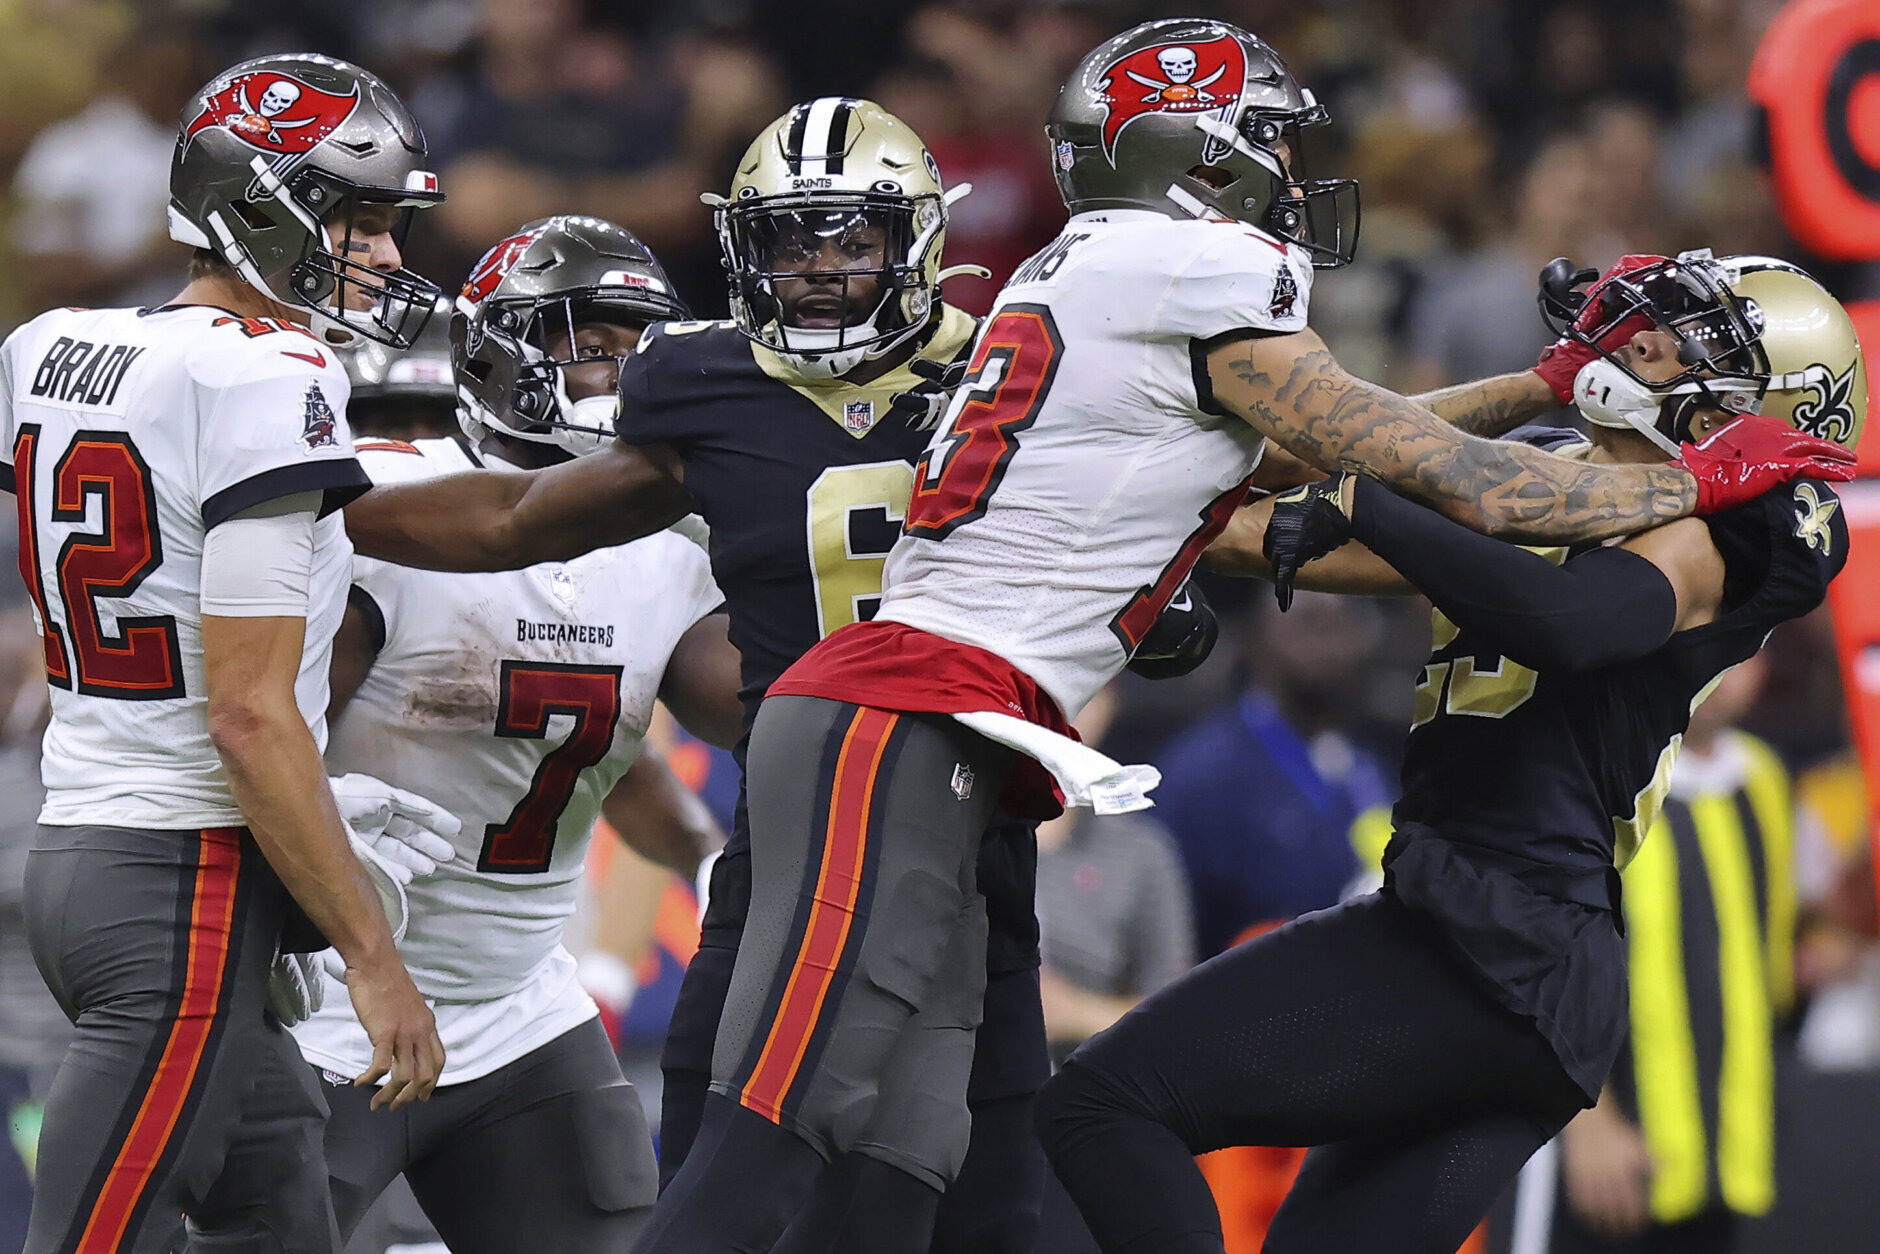 <p><b><i>Bucs 20</i></b><br />
<b><i>Saints 10</i></b></p>
<p>While Todd Bowles was right about this rivalry, it&#8217;s worth adding that a rivalry ain&#8217;t a rivalry until there&#8217;s <a href="https://wtop.com/nfl/2022/09/bucs-evans-saints-lattimore-ejected-in-latest-dust-up/" target="_blank" rel="noopener" data-saferedirecturl="https://www.google.com/url?q=https://wtop.com/nfl/2022/09/bucs-evans-saints-lattimore-ejected-in-latest-dust-up/&amp;source=gmail&amp;ust=1663641855998000&amp;usg=AOvVaw2aSvHttcl8VcP3u45wTkjl">a contentious, chippy contest between them like the ejection-filled game Sunday</a>. Mark your calendar for Monday night&#8217;s rematch Dec. 5.</p>
